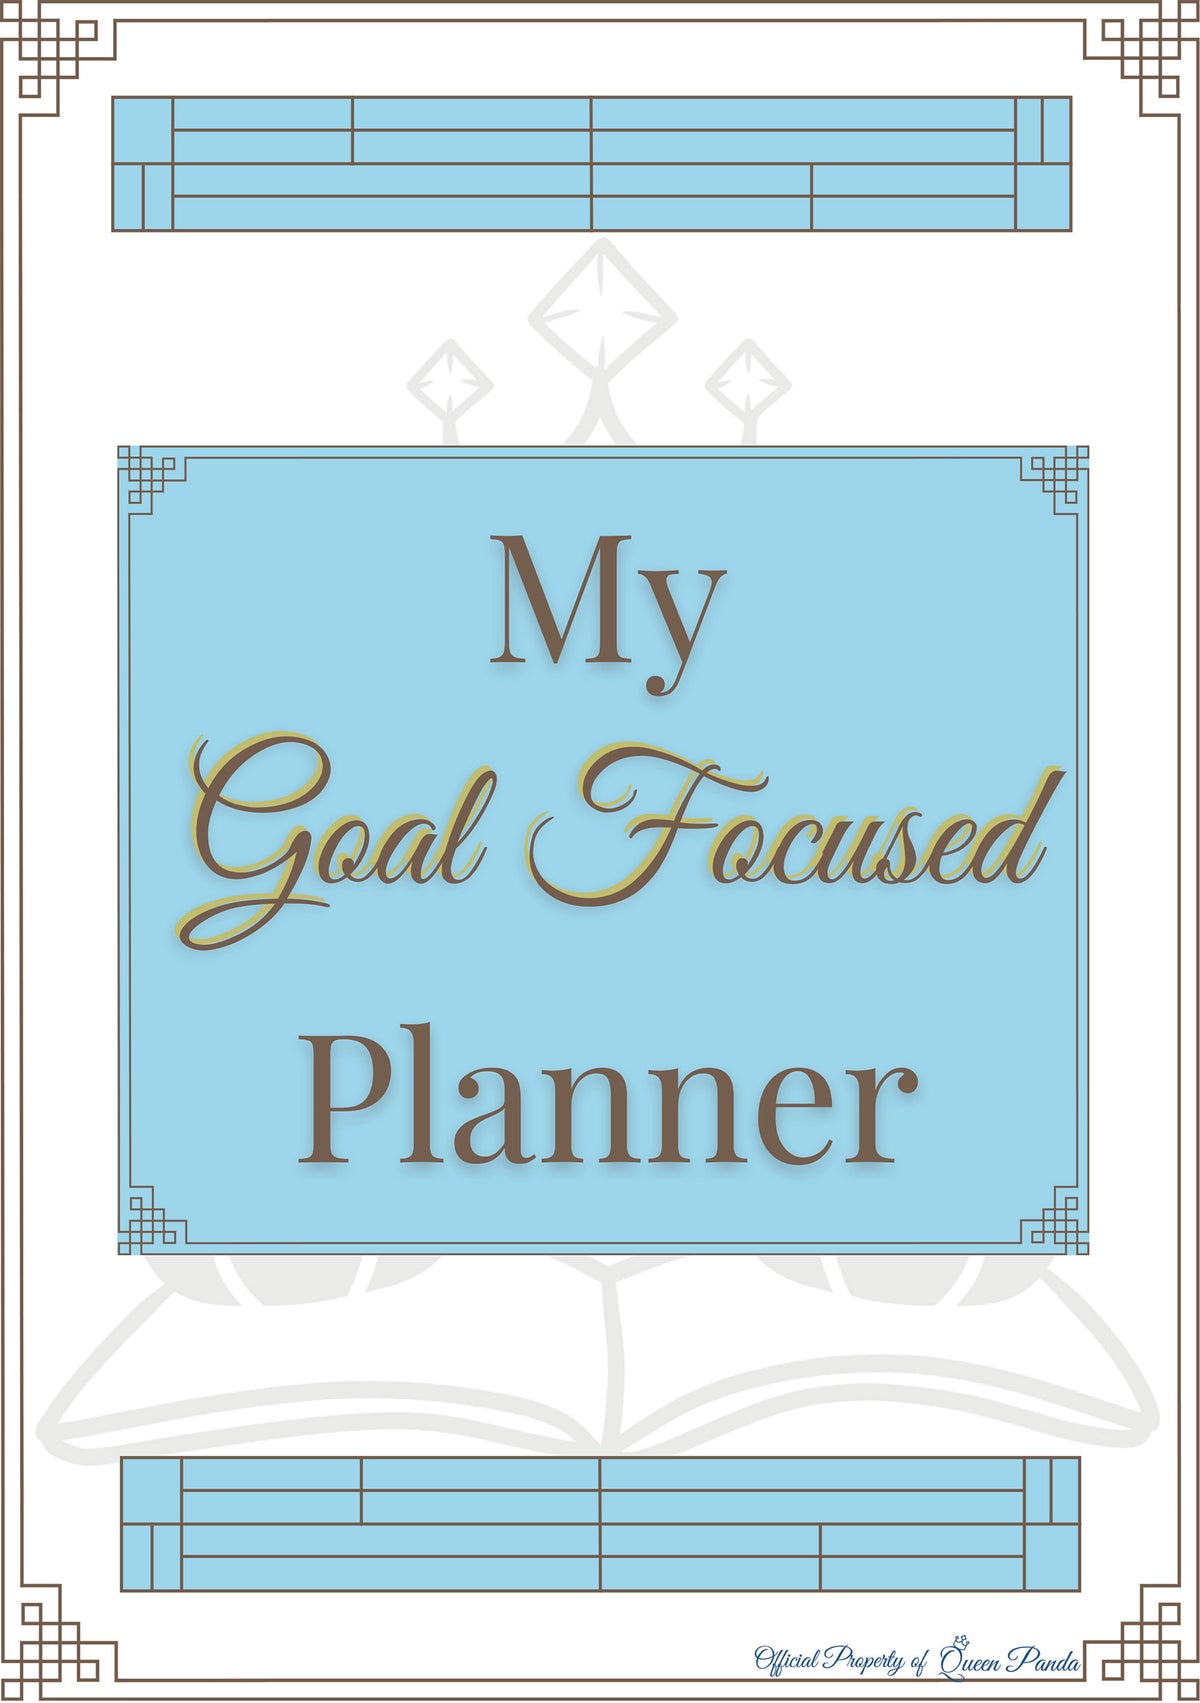 Monthly Goal Focused Planner